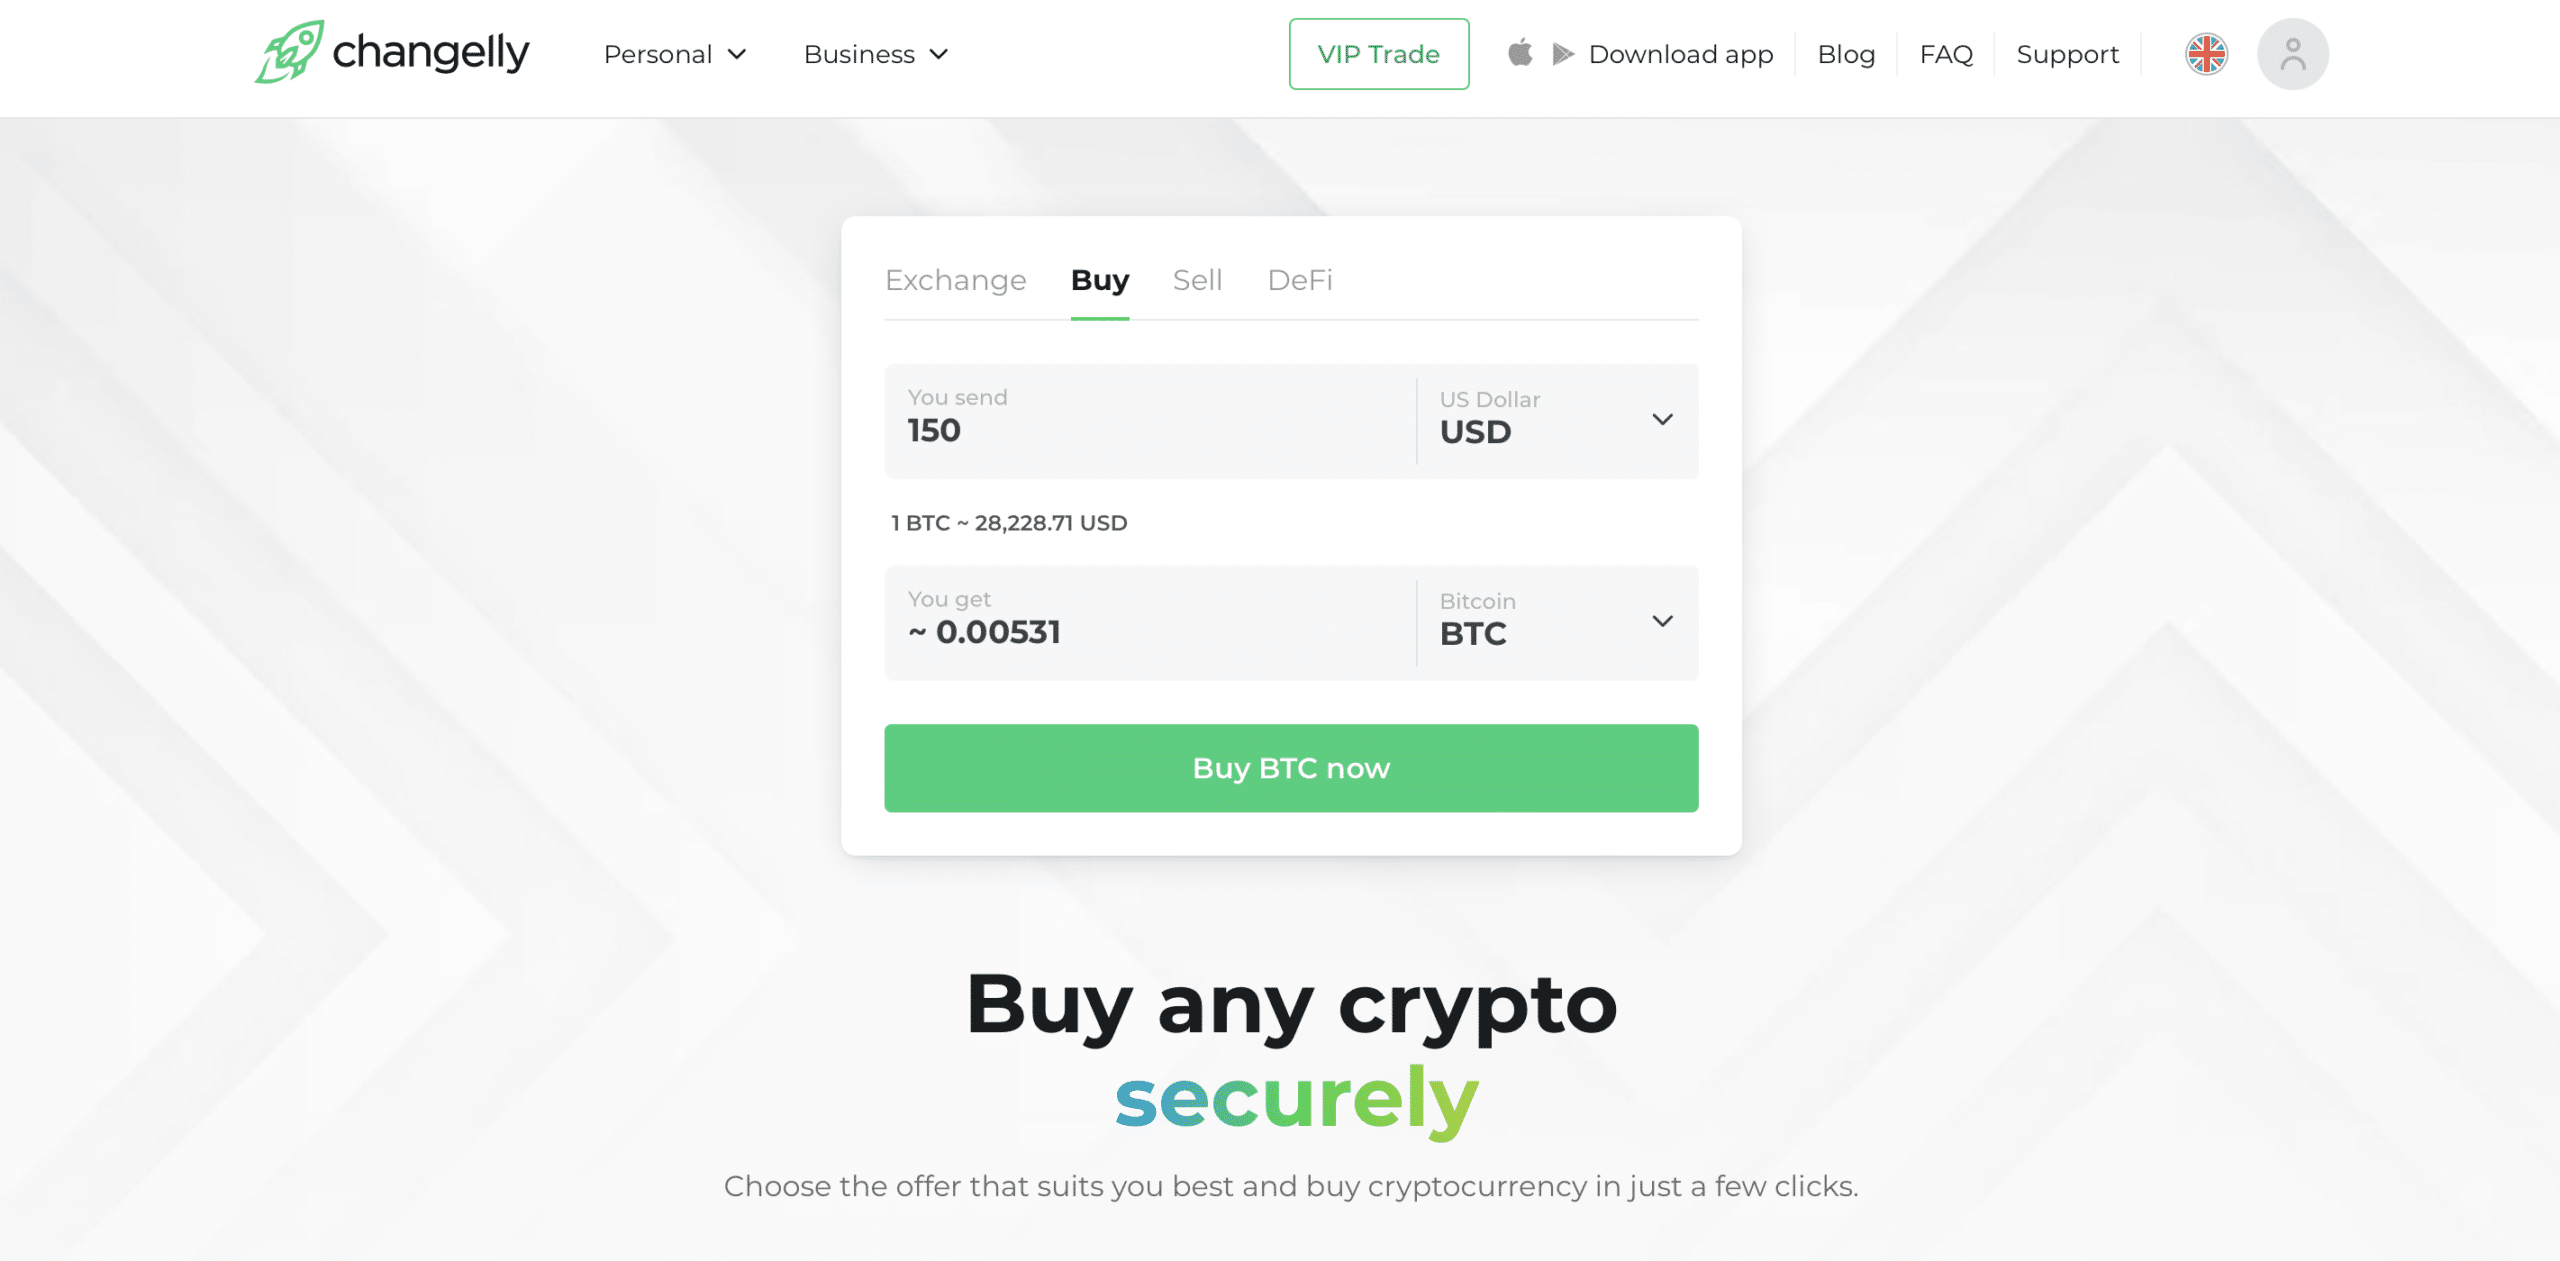 Complete Changelly Review: Everything You Didn't Know Before